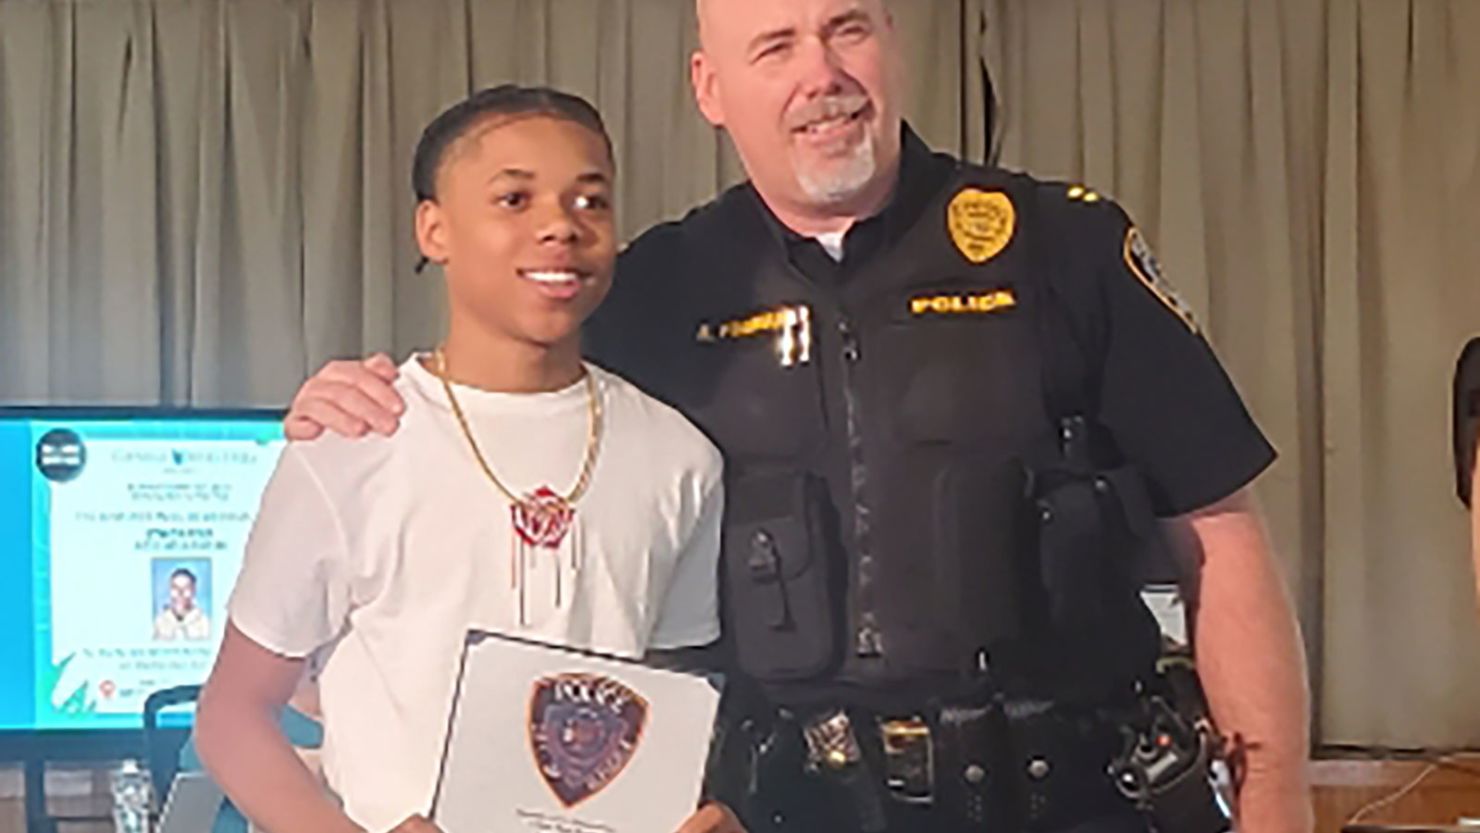 Acie Holland, 14, is pictured receiving an award from the local police department.